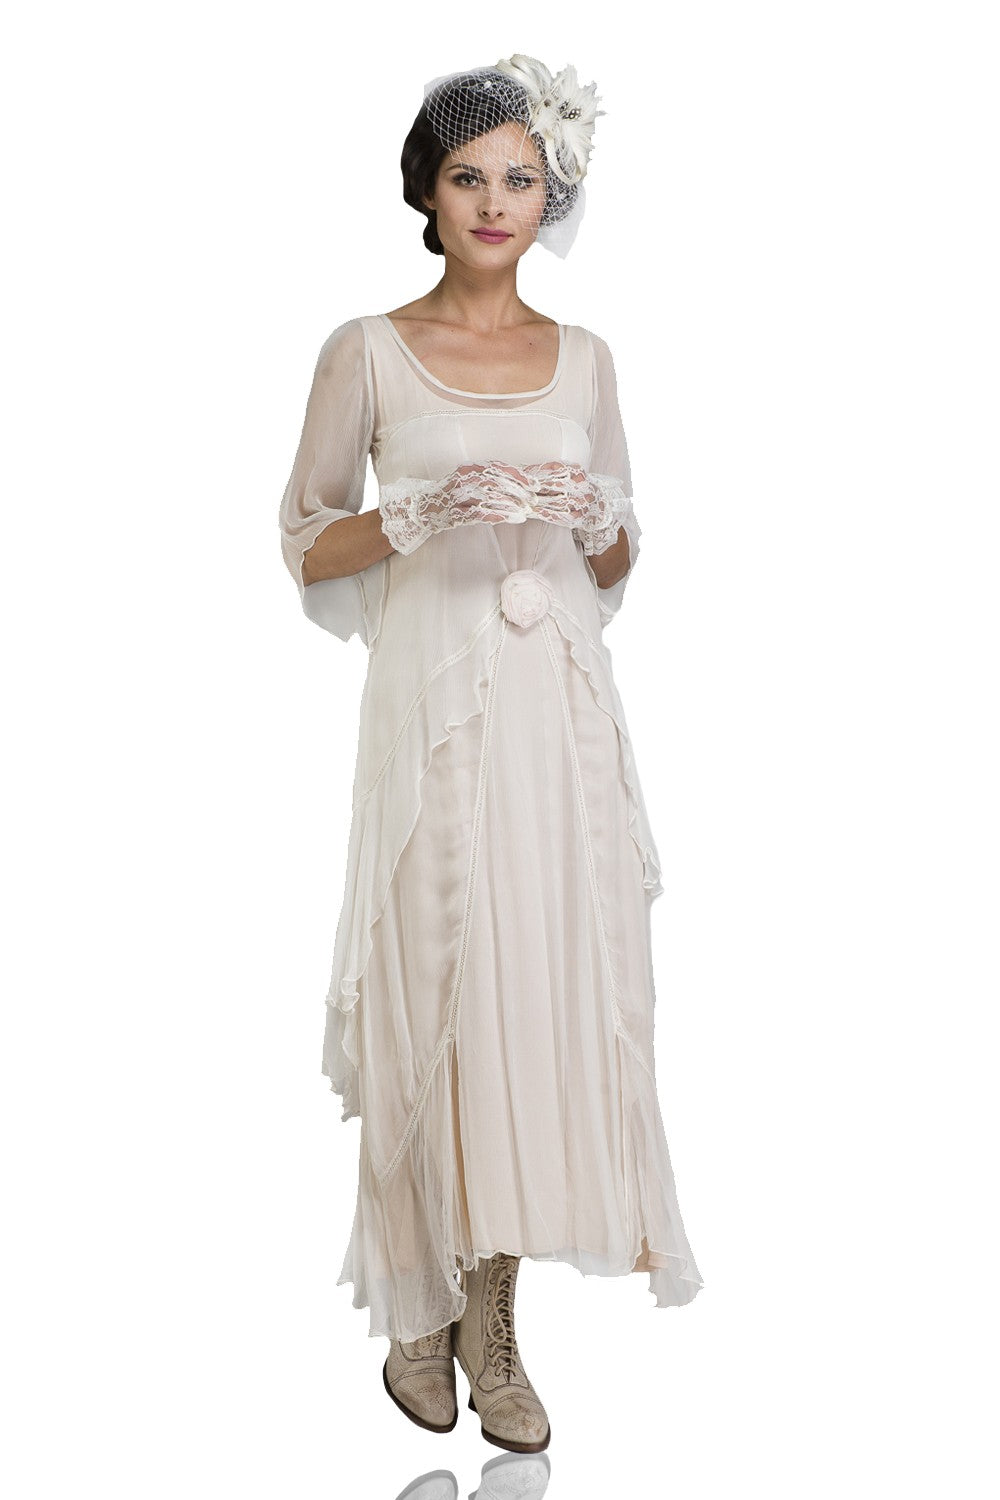 Roaring 20s Costumes- Flapper Costumes, Gangster Girl Costumes Great Gatsby Party Dress in Ivory by Nataya $249.00 AT vintagedancer.com